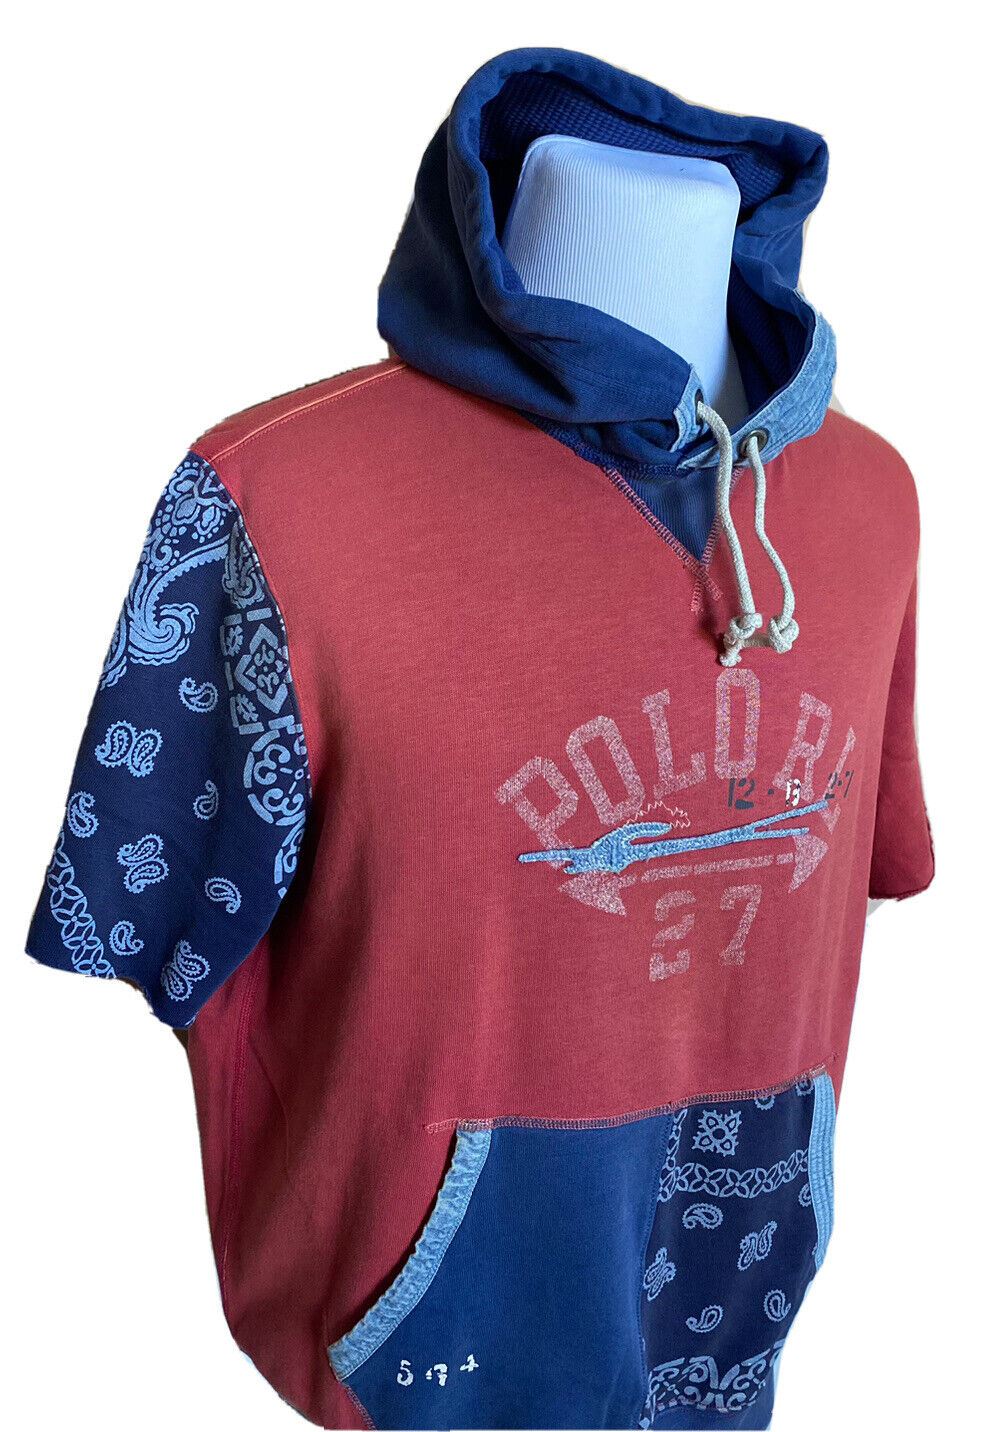 NWT $188 Polo Ralph Lauren Logo Short Sleeve T-Shirt with Hoodie Large